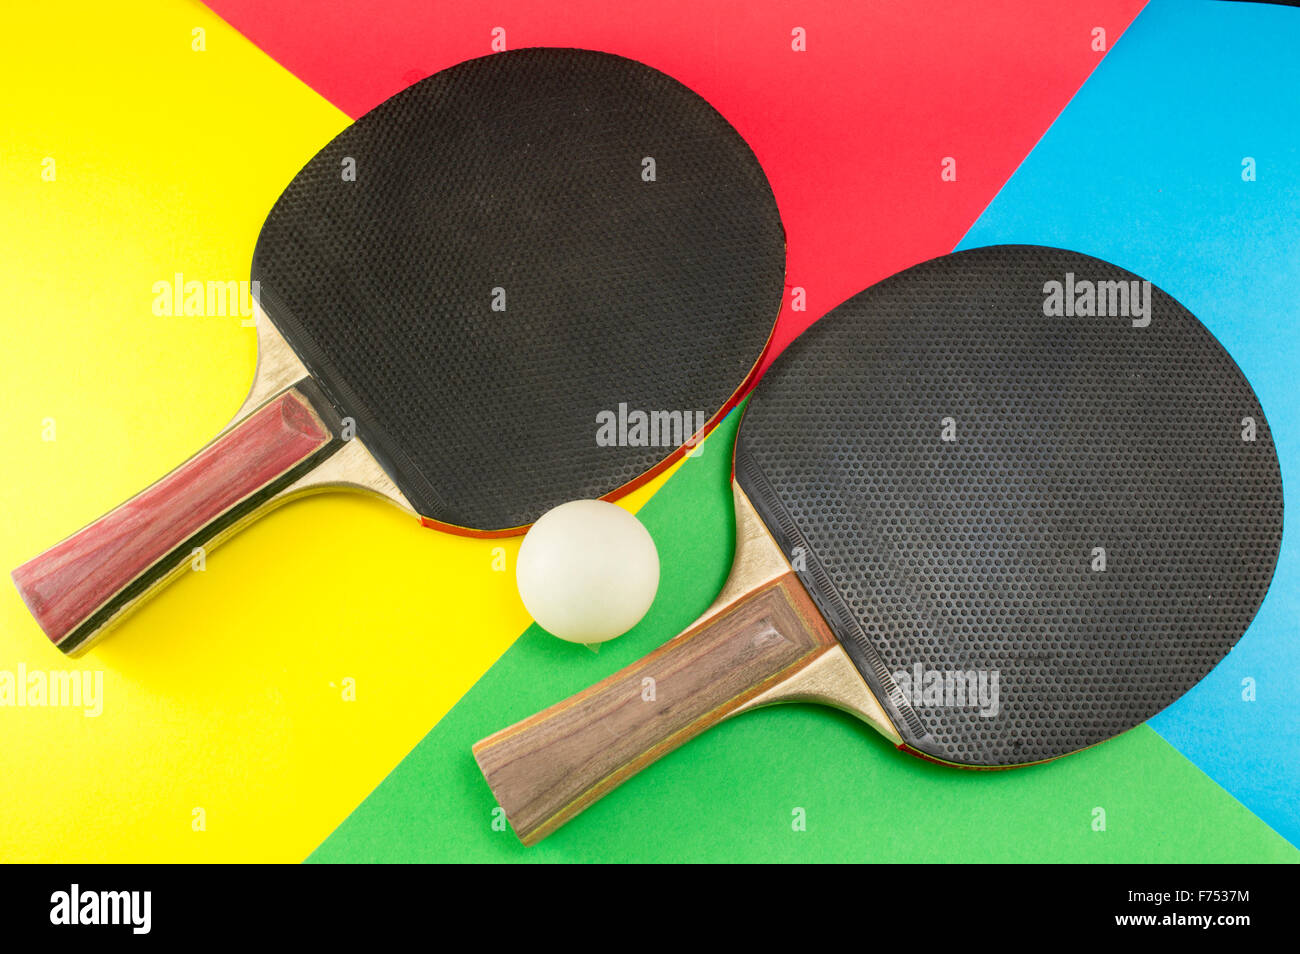 Pair of table tennis paddles on a colorful collage background Stock Photo